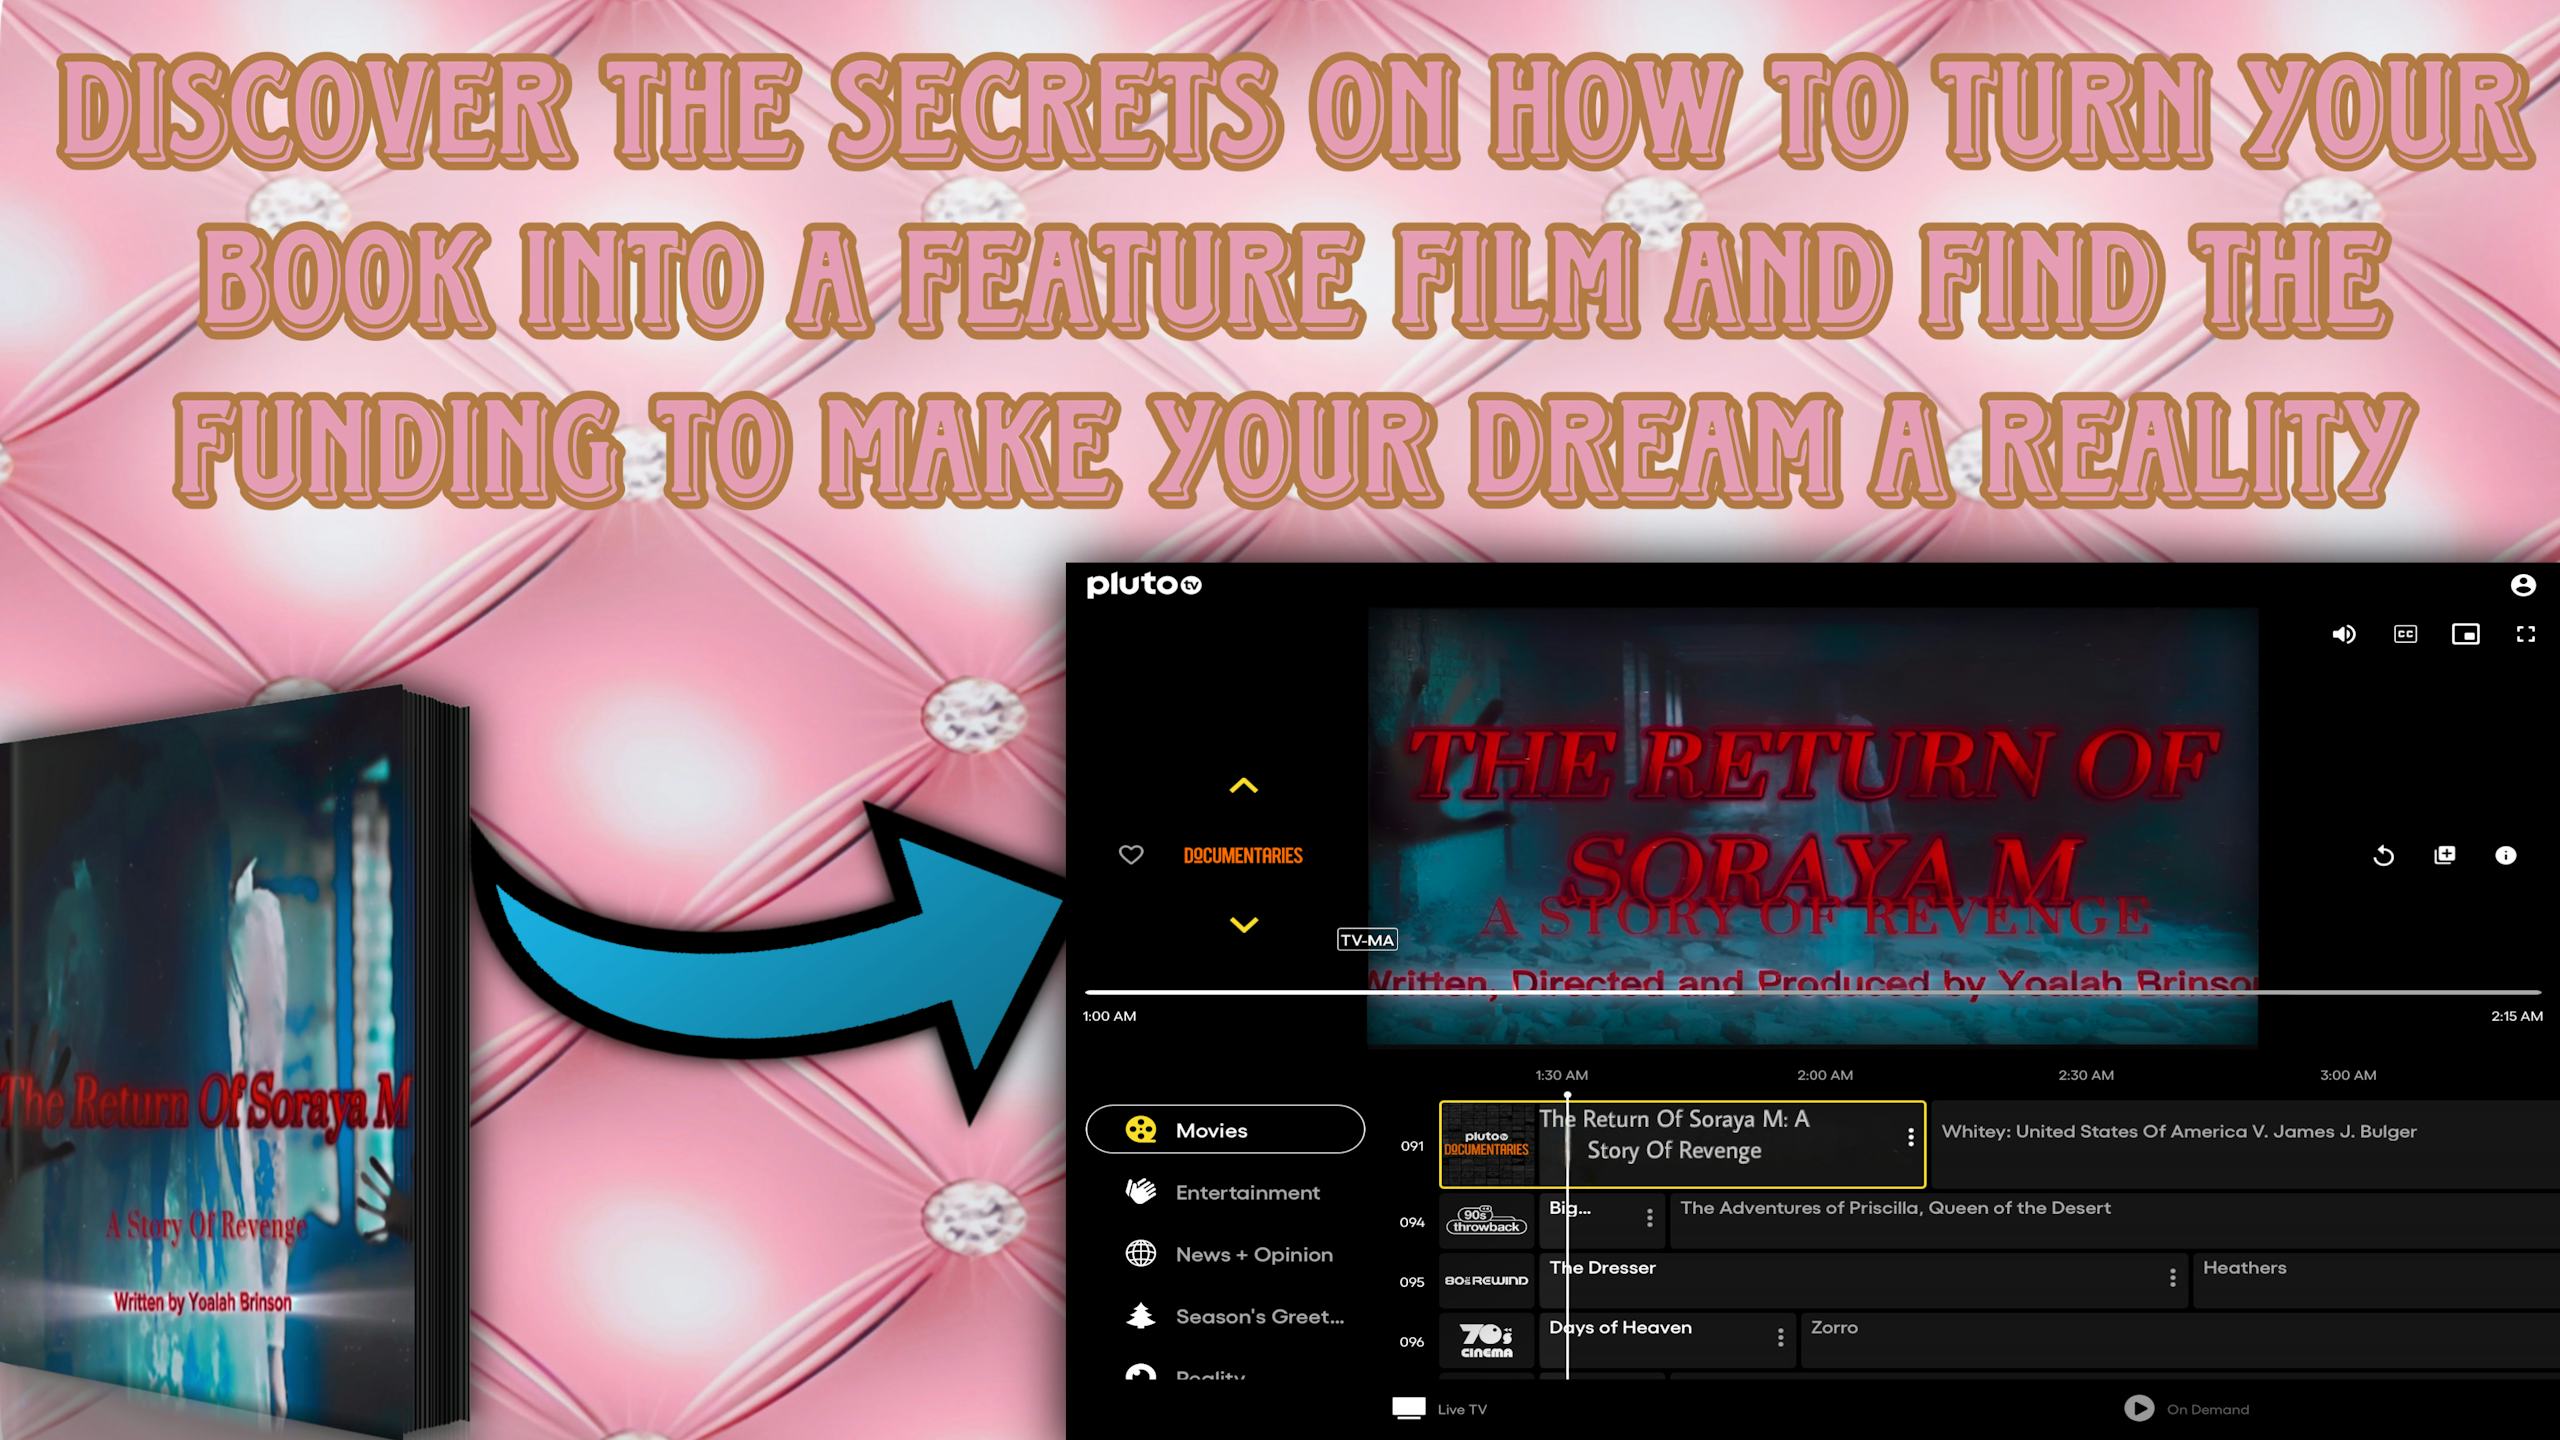 Discover The Secrets On How To Turn Your Book Into A Feature Film And Find The Funding To Make Your Dream A Reality